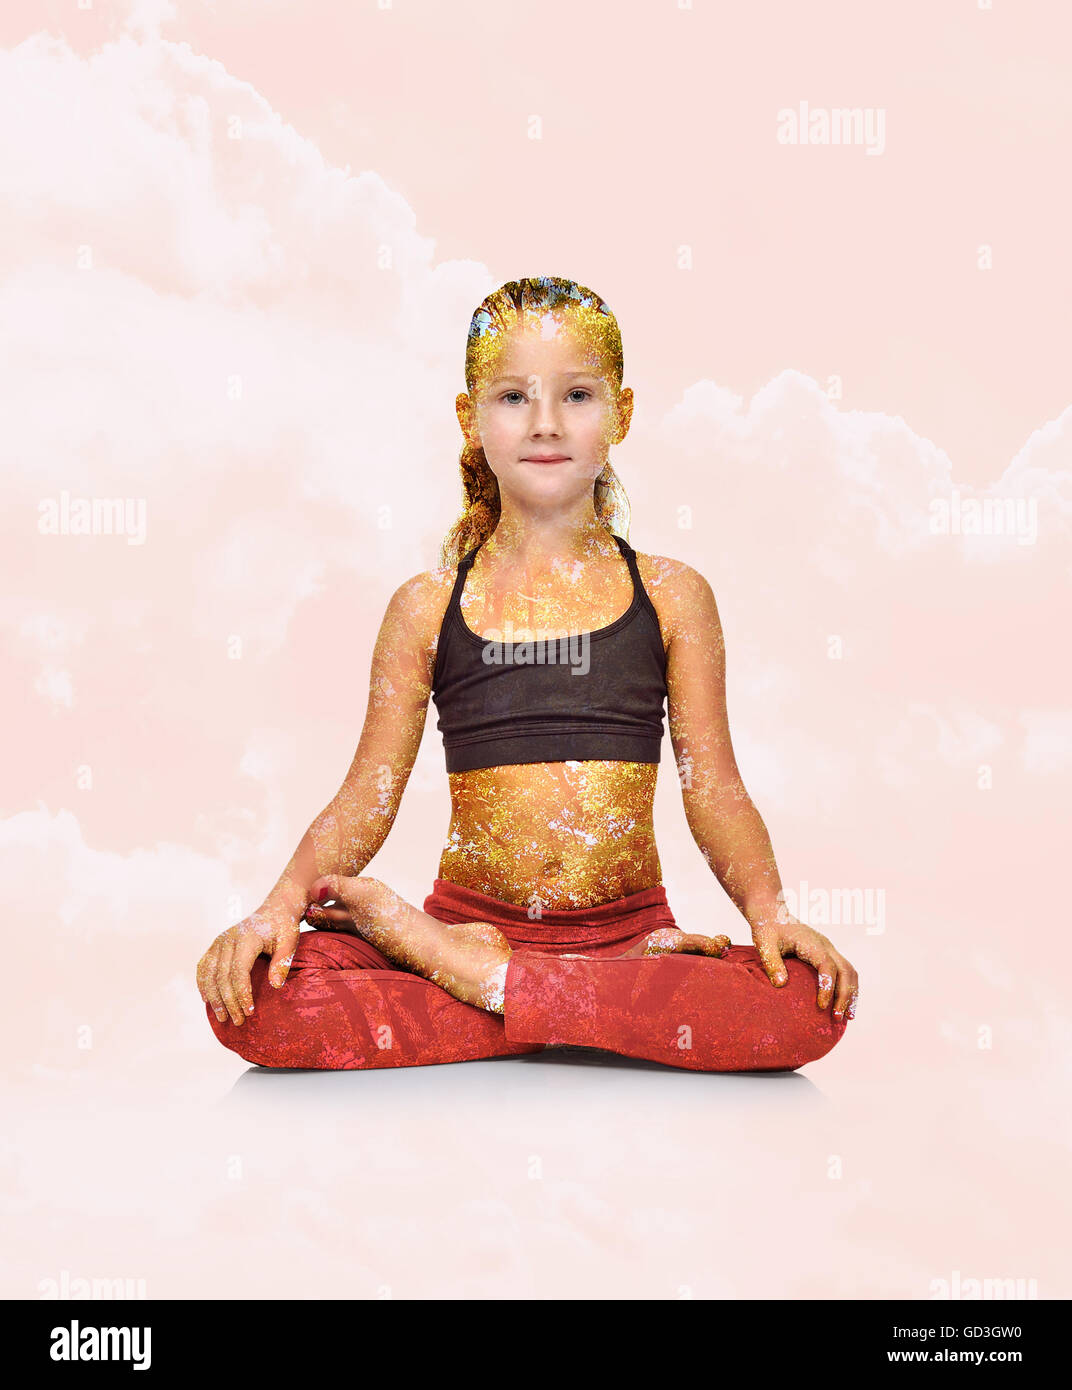 Little girl in red clothing sitting lotus position. Double exposure effect Stock Photo